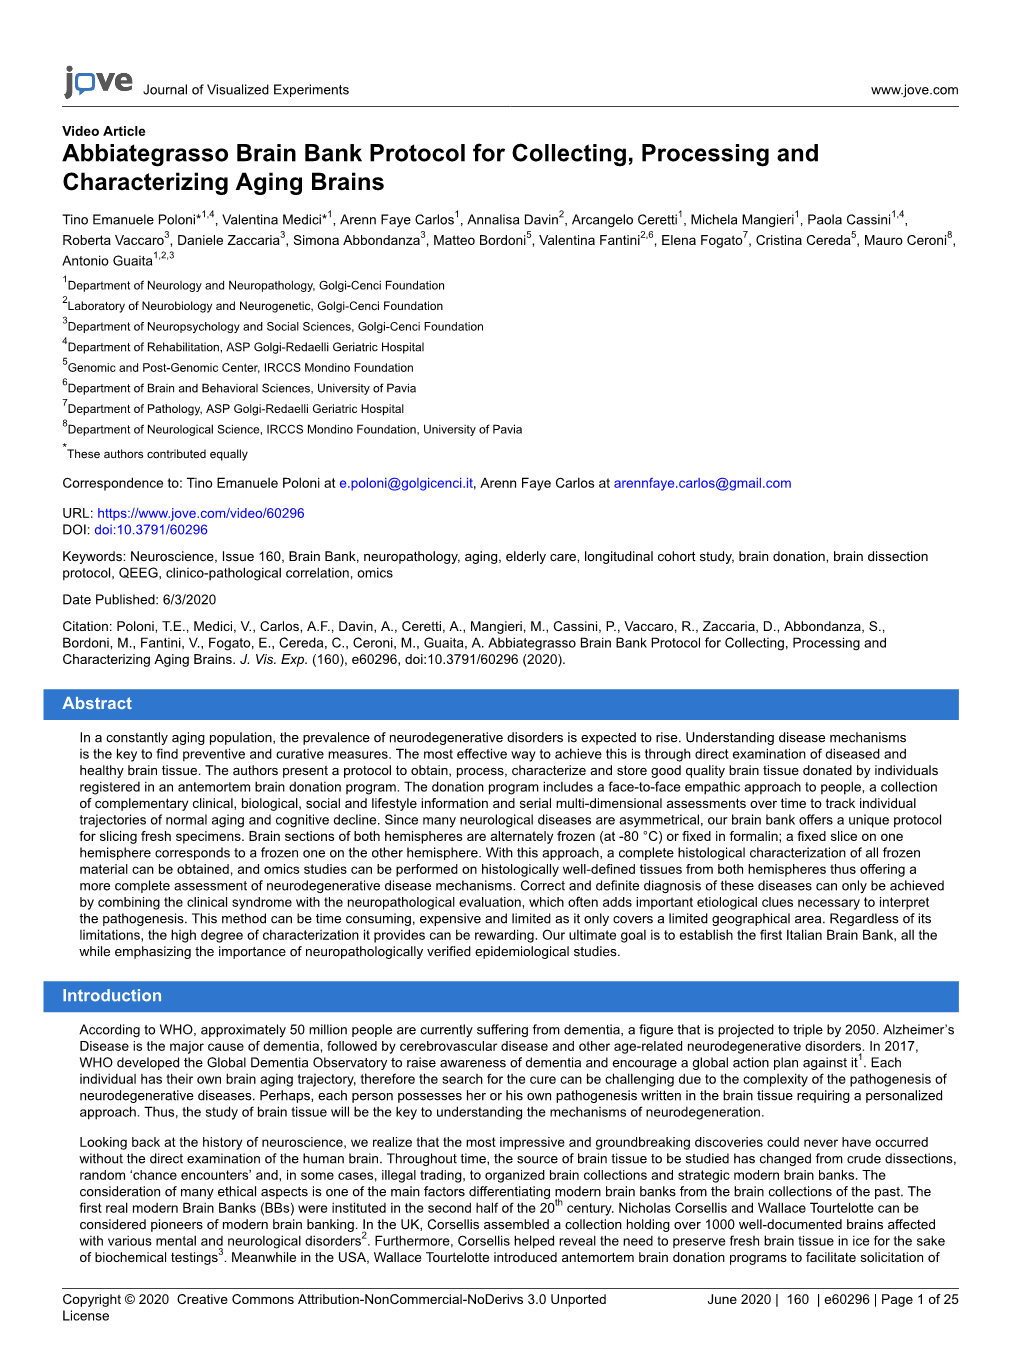 Abbiategrasso Brain Bank Protocol for Collecting, Processing and Characterizing Aging Brains